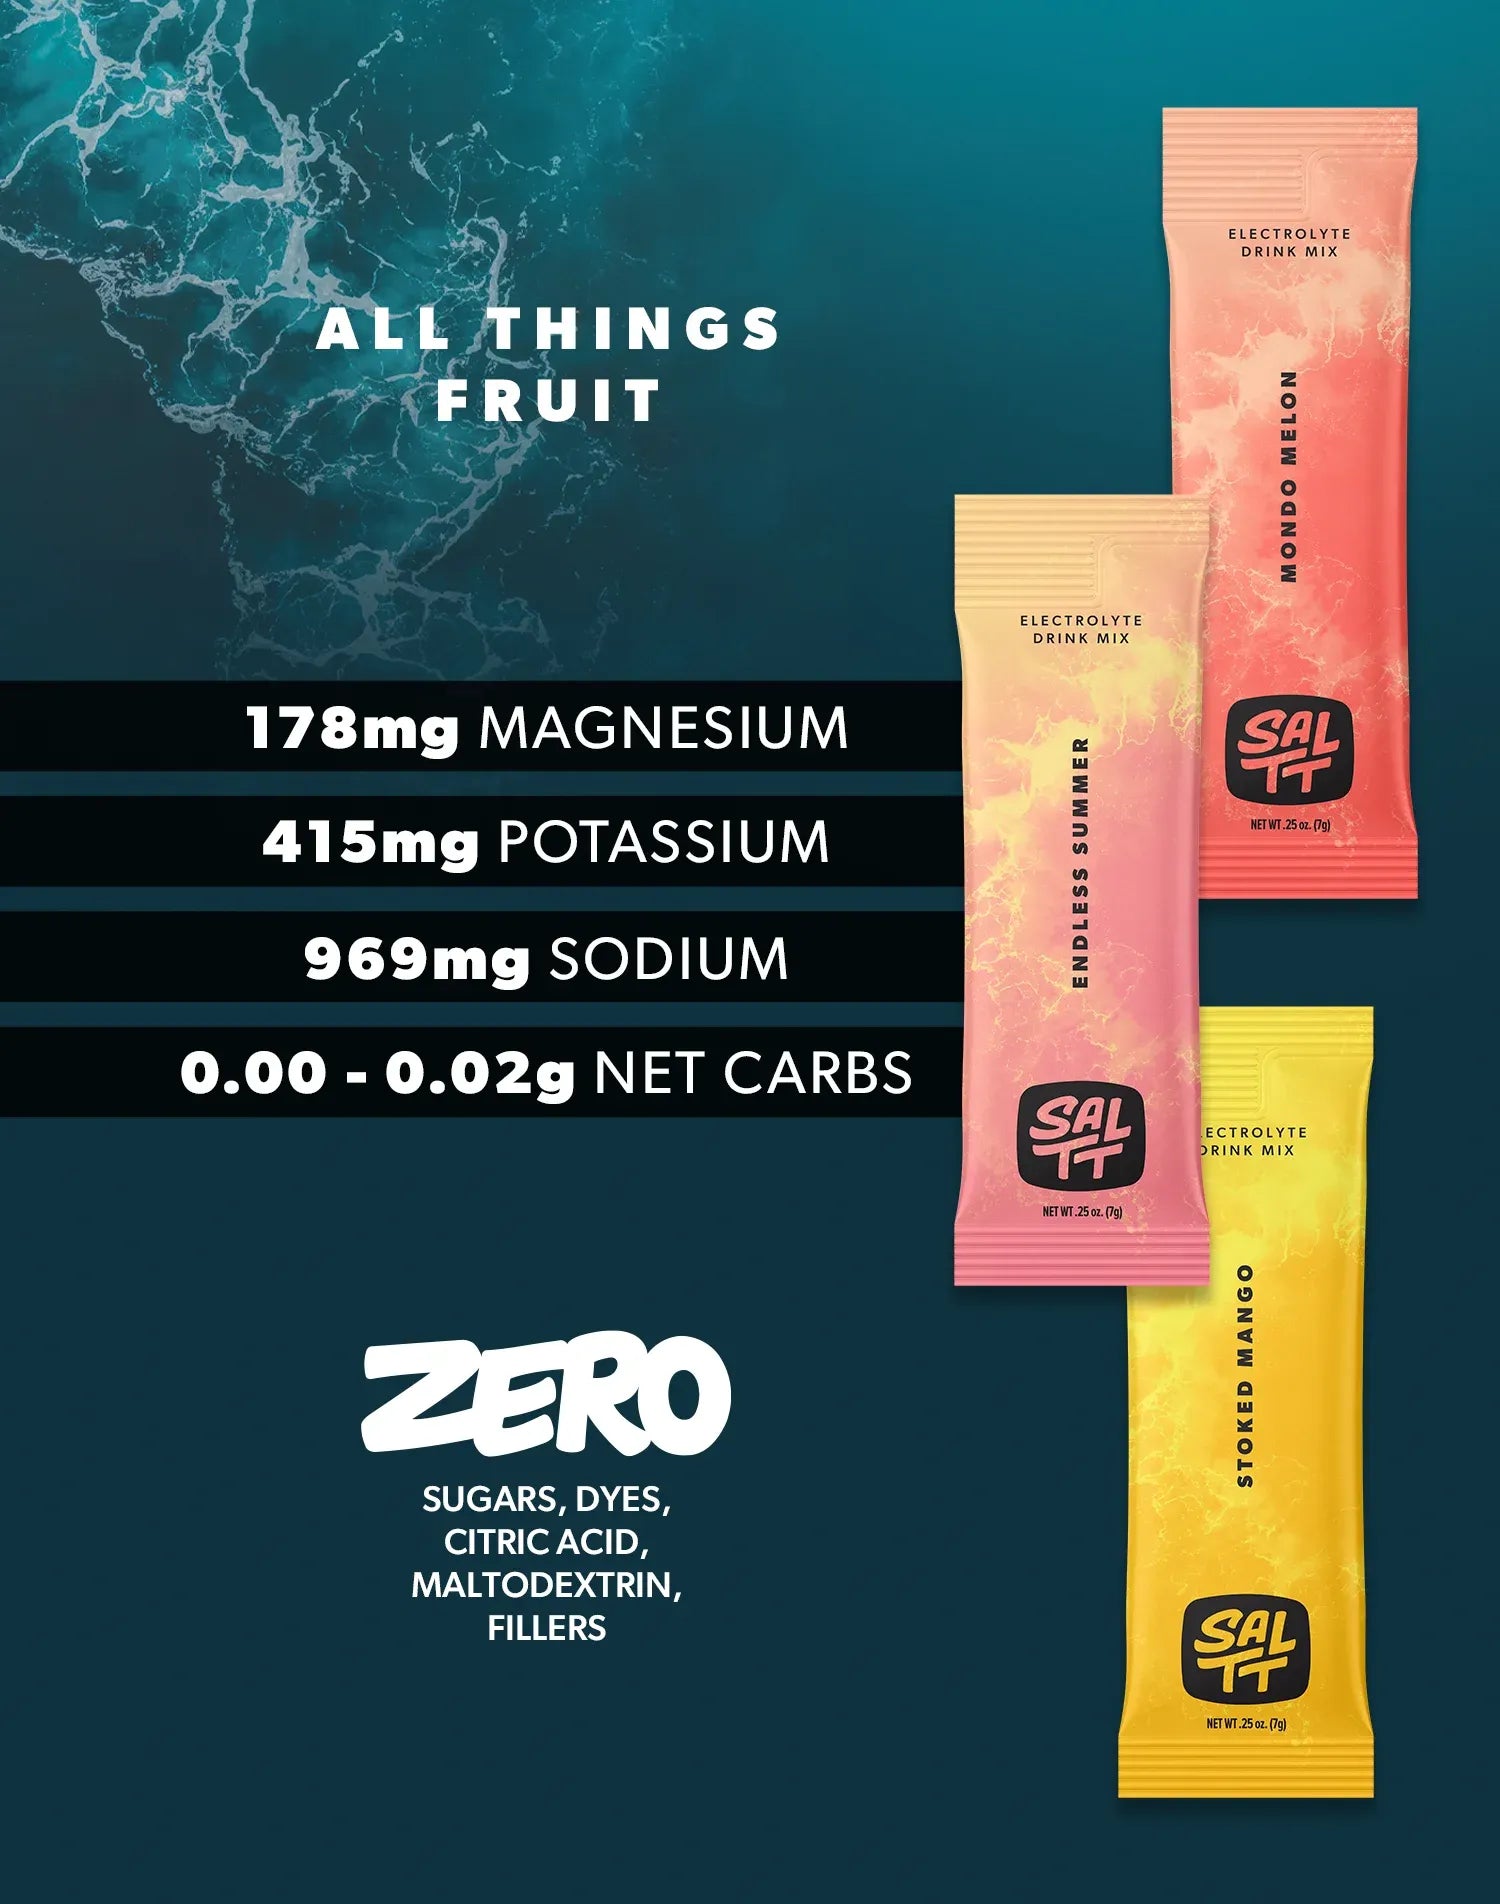 Nutrition for 30 stick All Things Fruit Variety Pack. All Flavors in this variety pack have 178mg Magnesium, 415mg Potassium, 969mg Sodium, 0.00-0.02g net carbs. Zero Sugars, Dyes, Citric Acid, Maltodextrin, or Fillers. See nutrition dropdown for complete supplement facts.